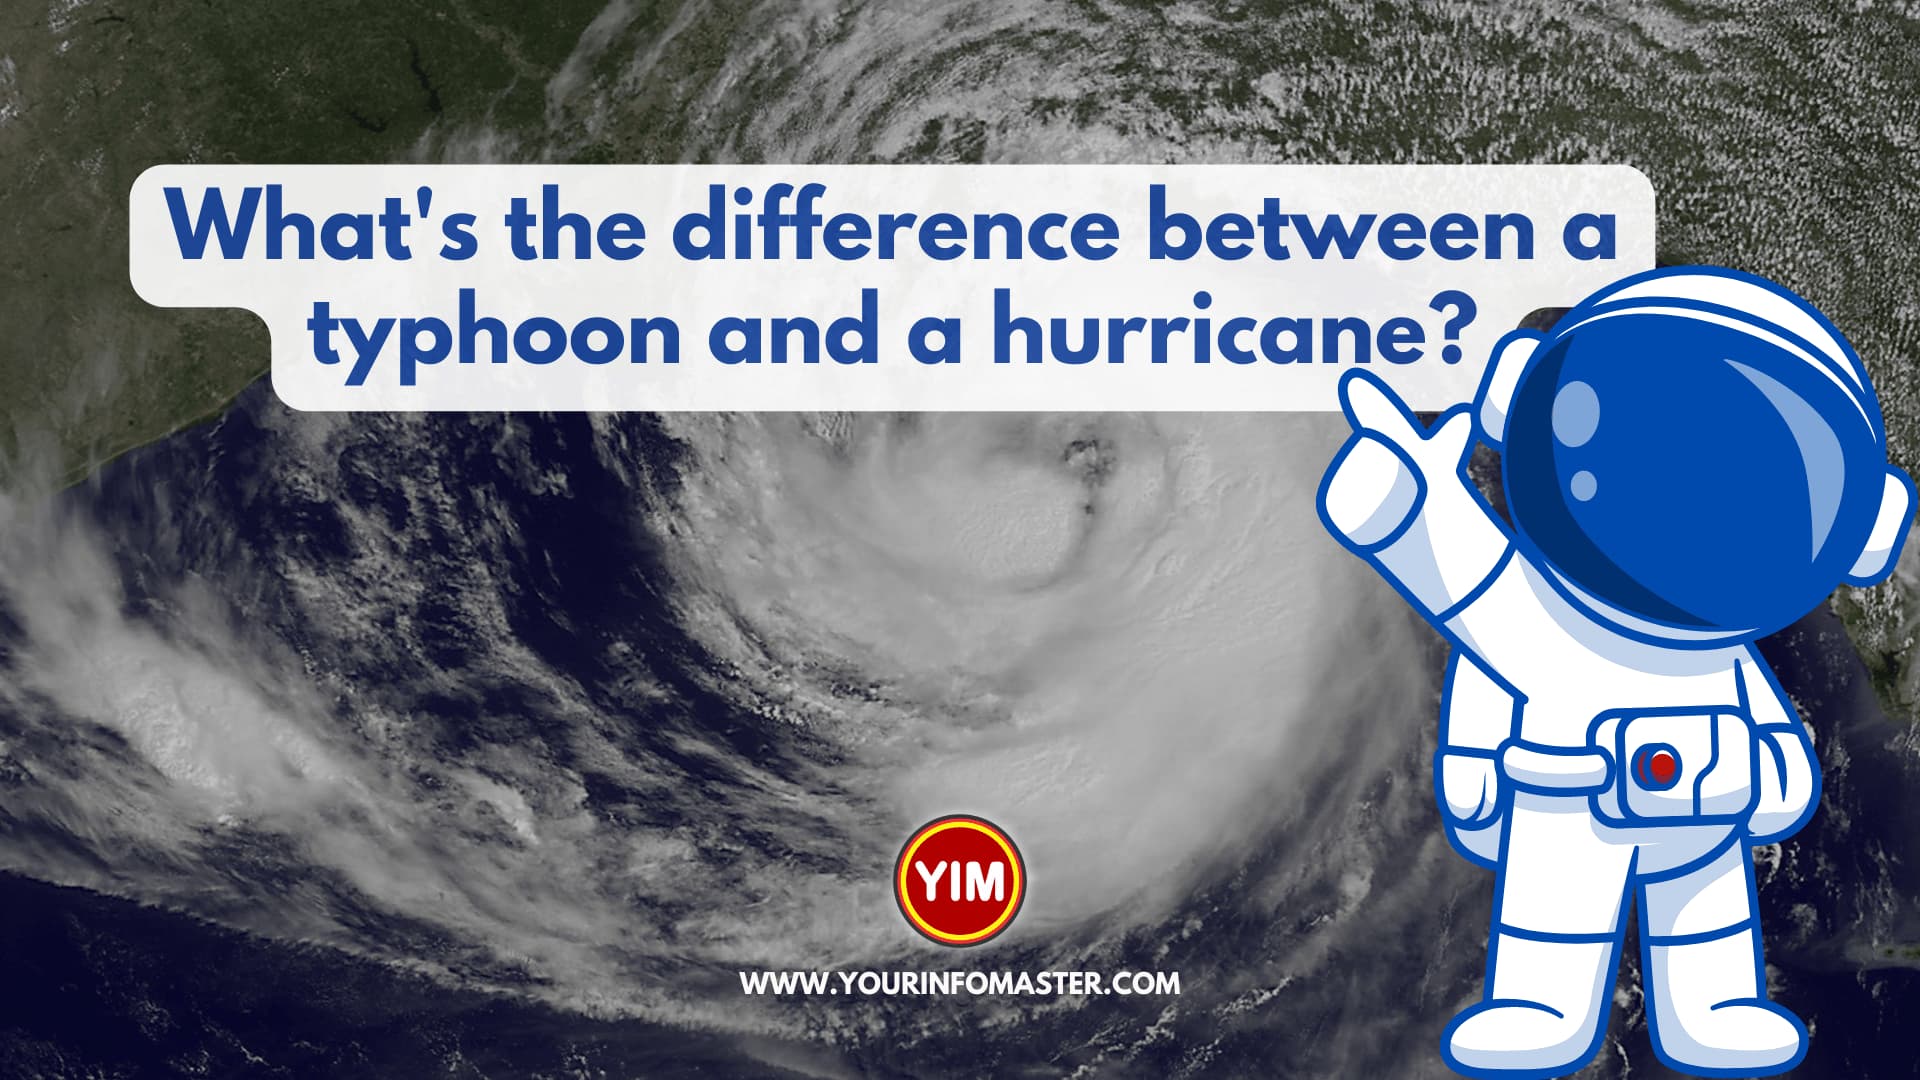 What's the difference between a typhoon and a hurricane